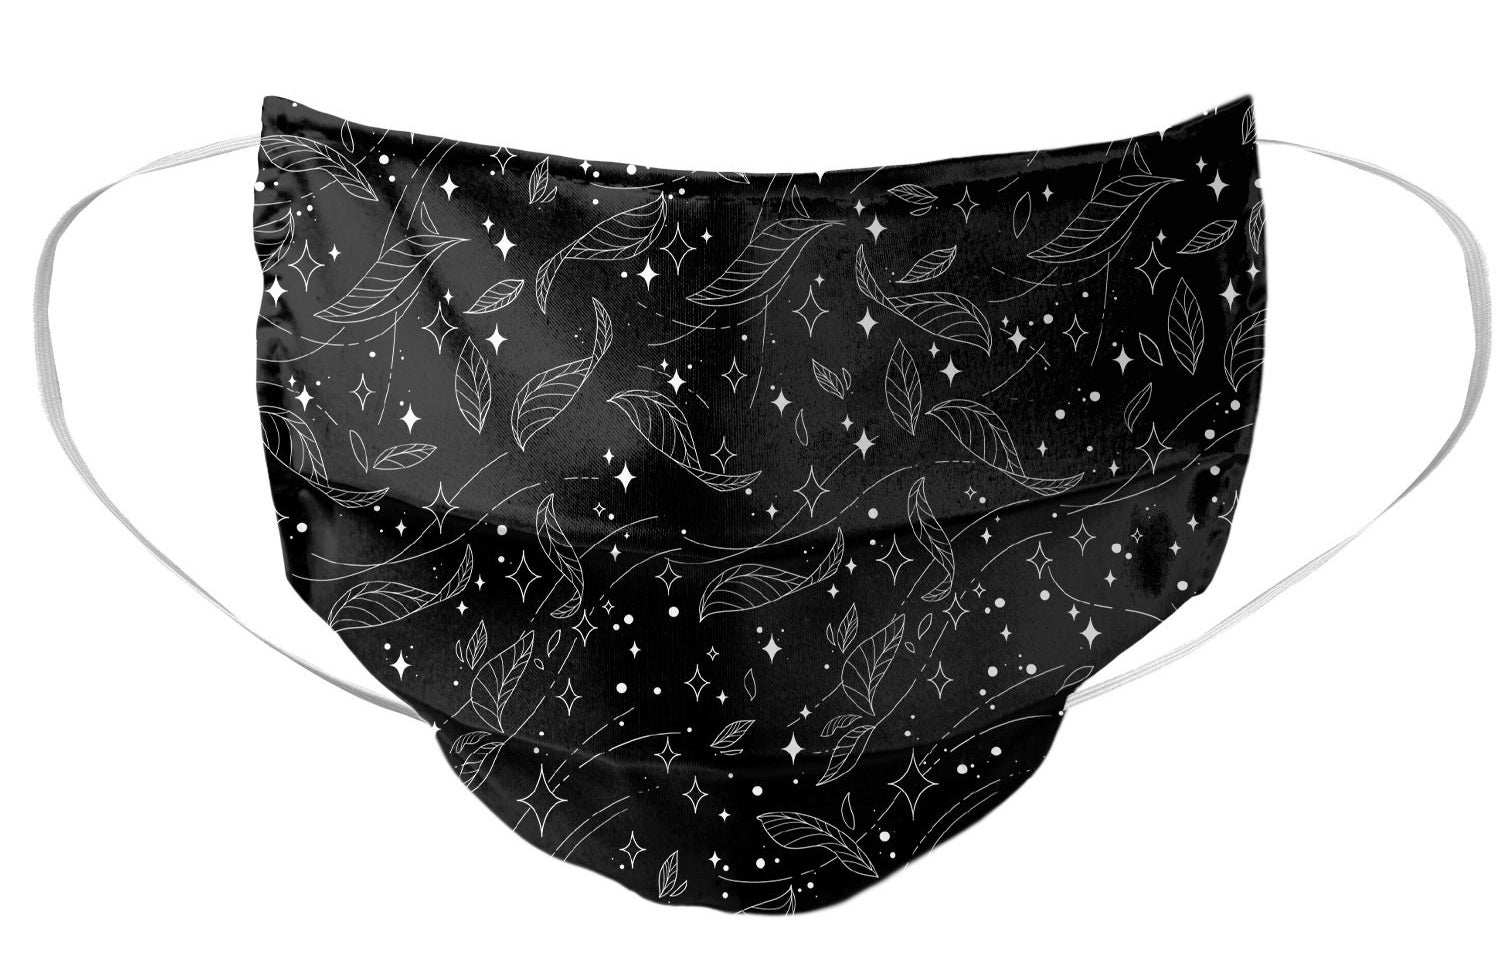 Black cloth face mask with swirls and elastic ear straps